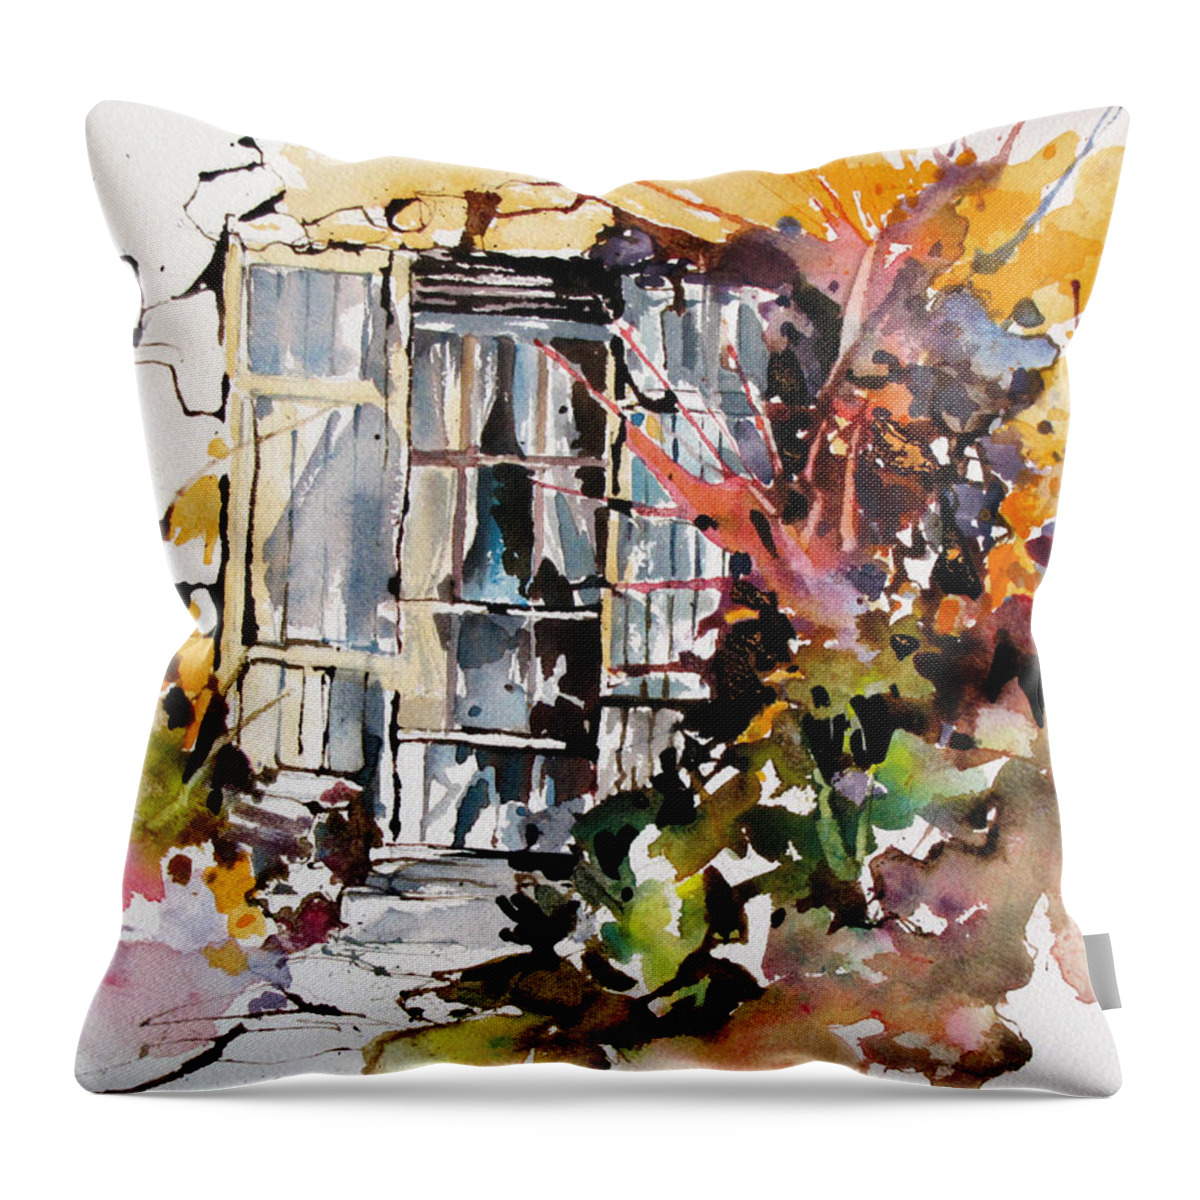 Vines Throw Pillow featuring the painting Brambles by Rae Andrews